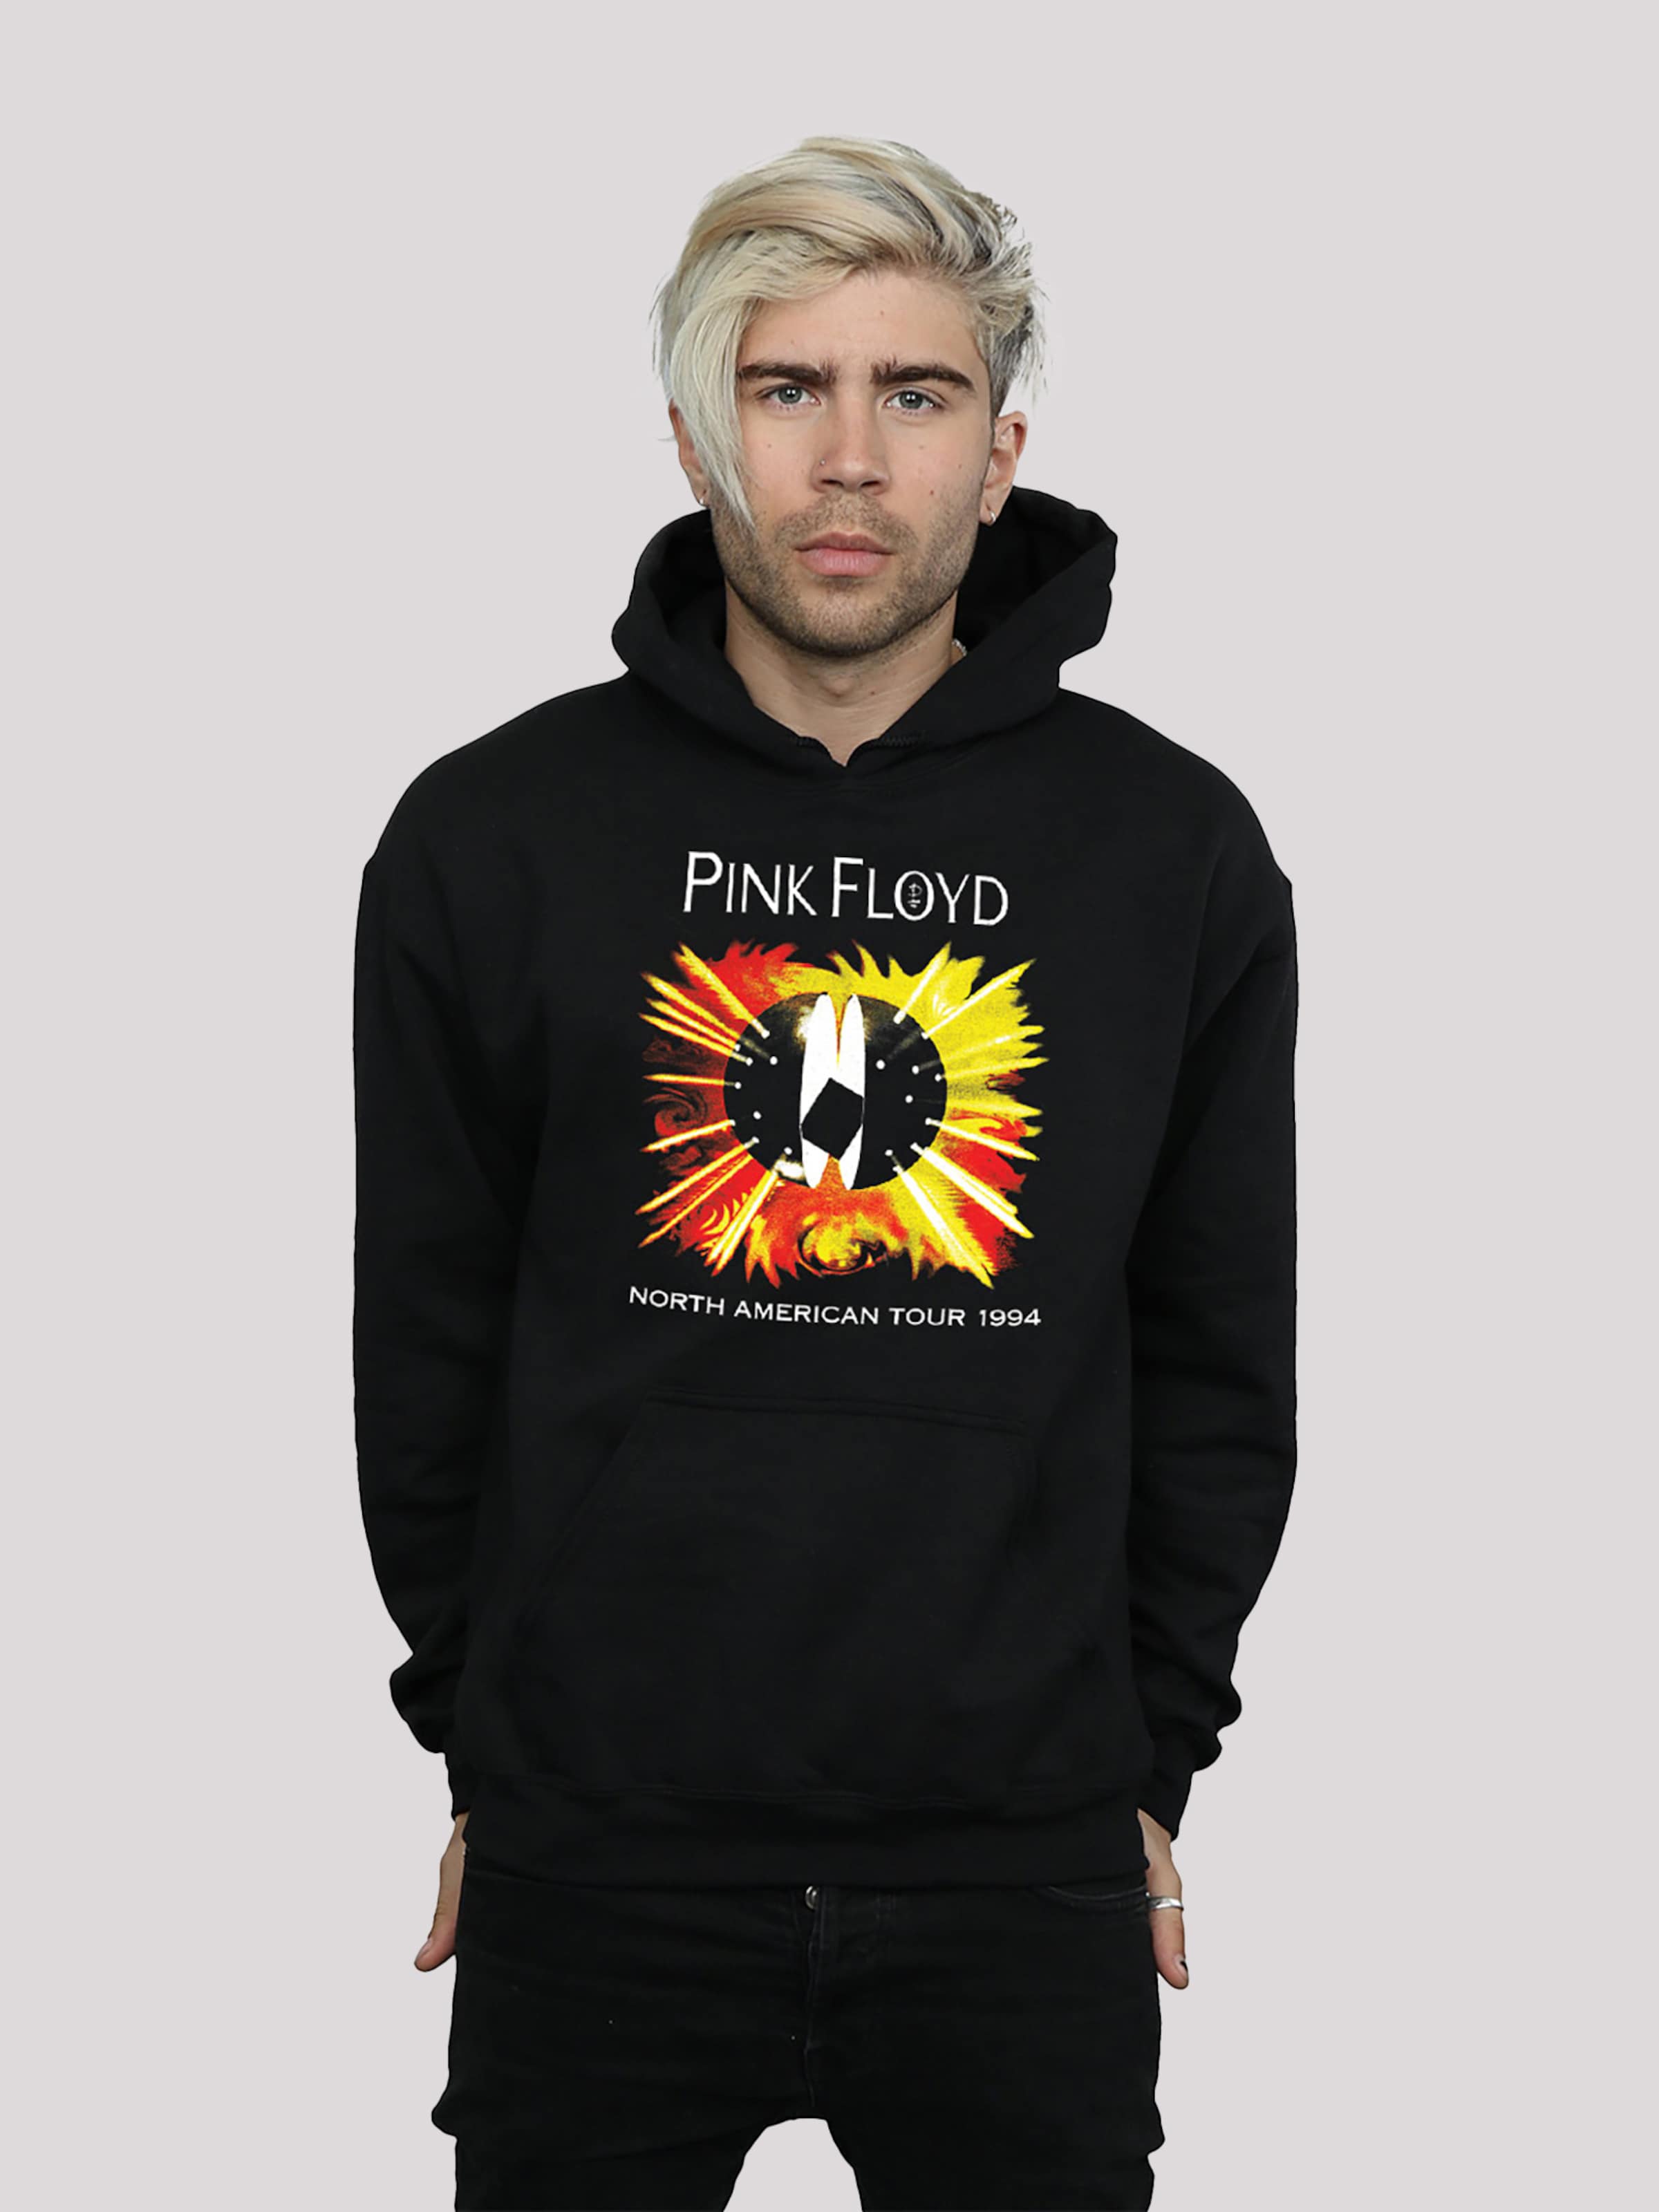 F4NT4STIC Sweatshirt | ABOUT North YOU American Black \'Pink 1994\' in Tour Floyd